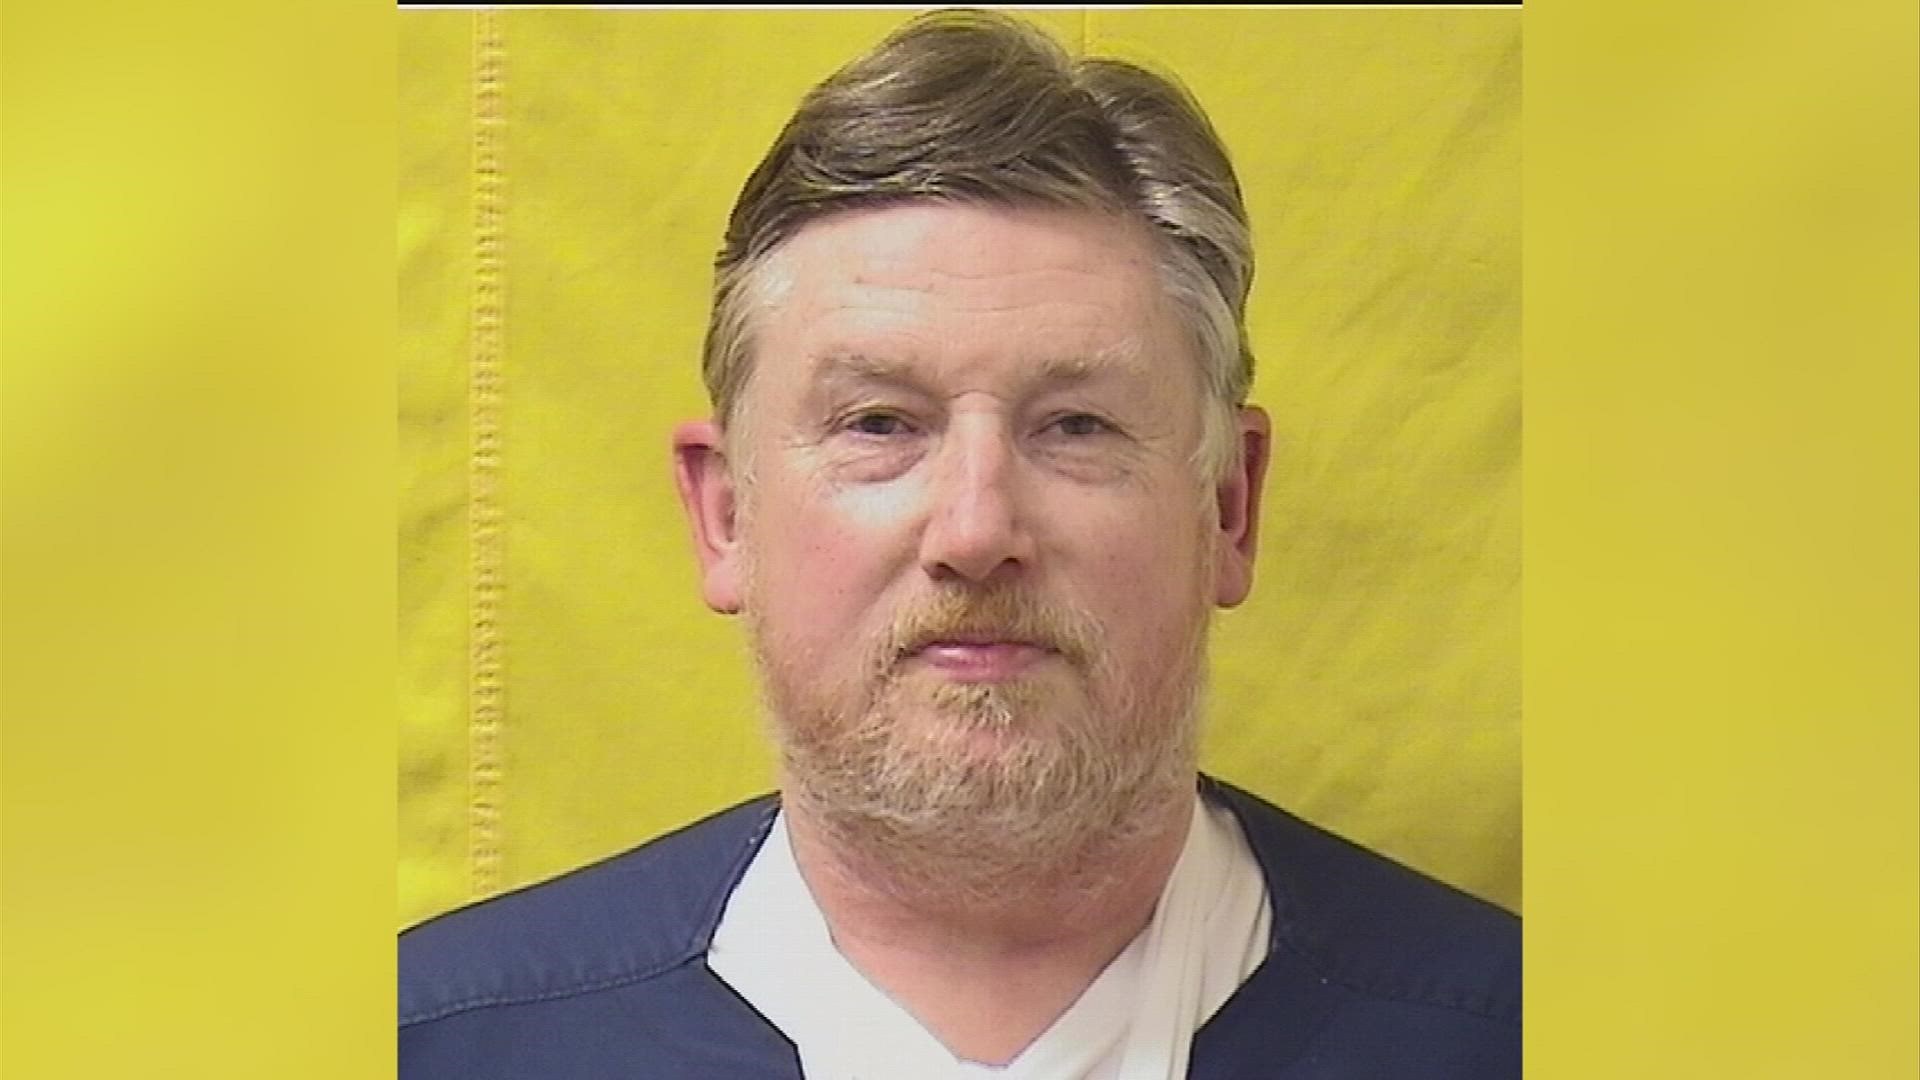 Davis pleaded guilty in January 2020 to four counts of pandering sexually-oriented matter involving a minor.